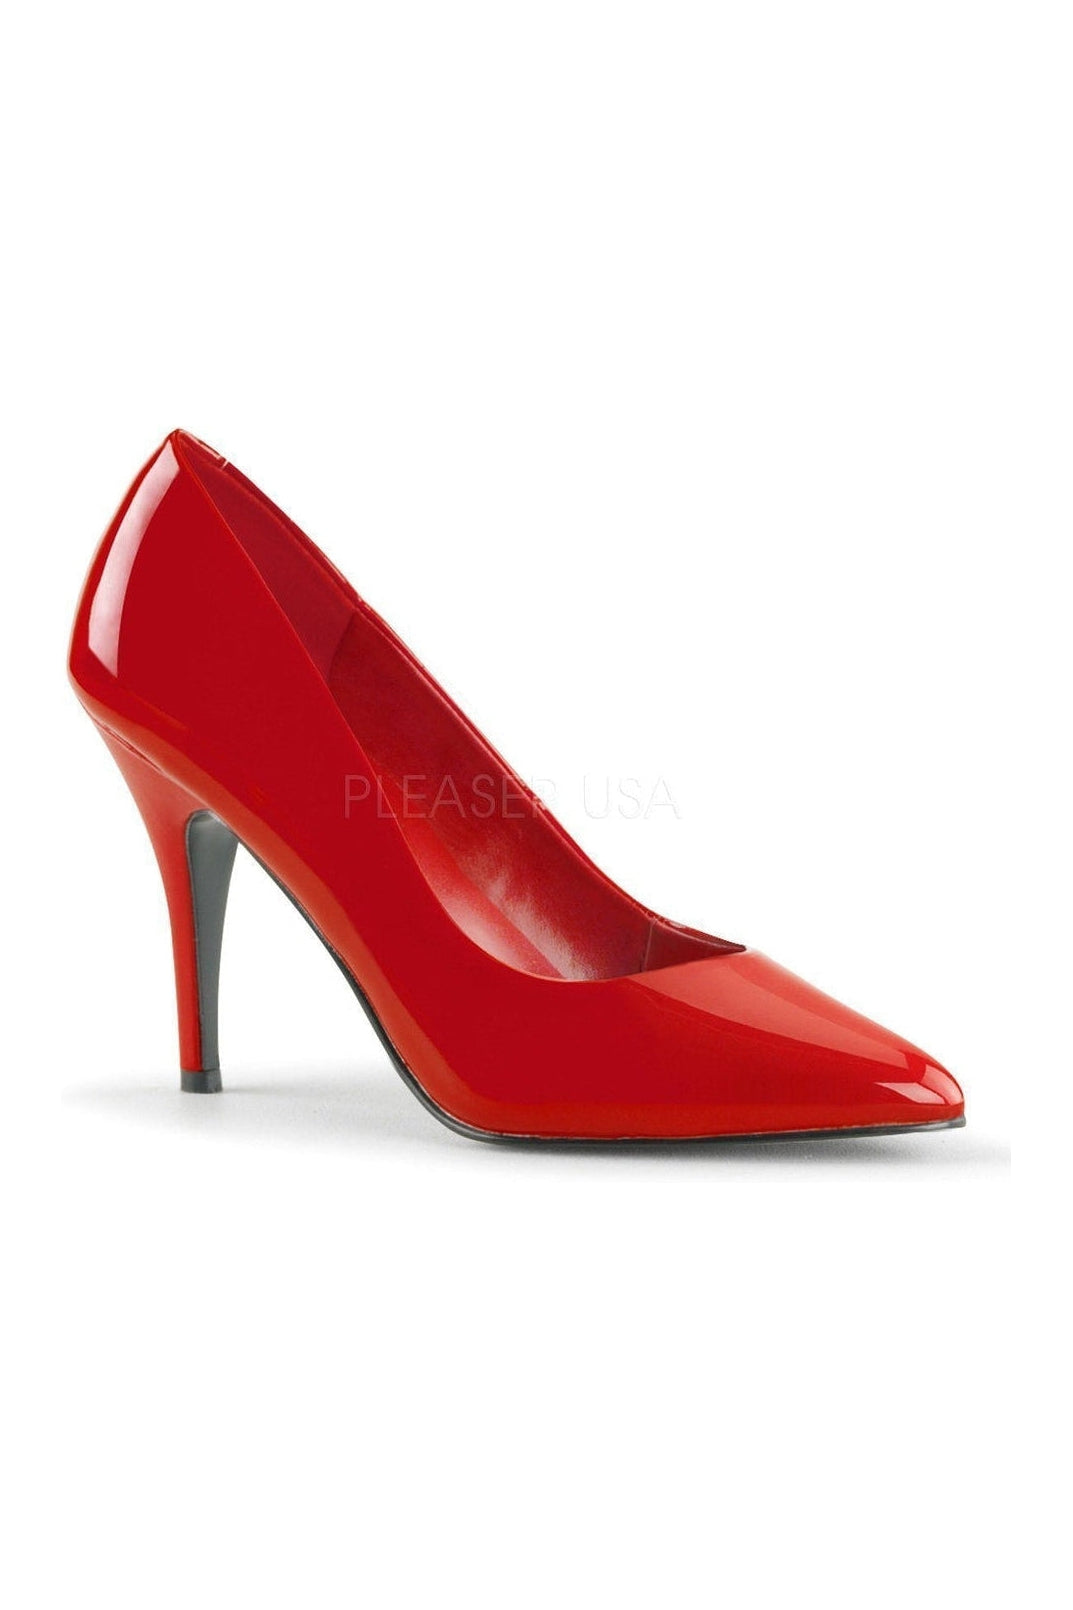 VANITY-420 Pump | Red Patent-Pleaser-Red-Pumps-SEXYSHOES.COM